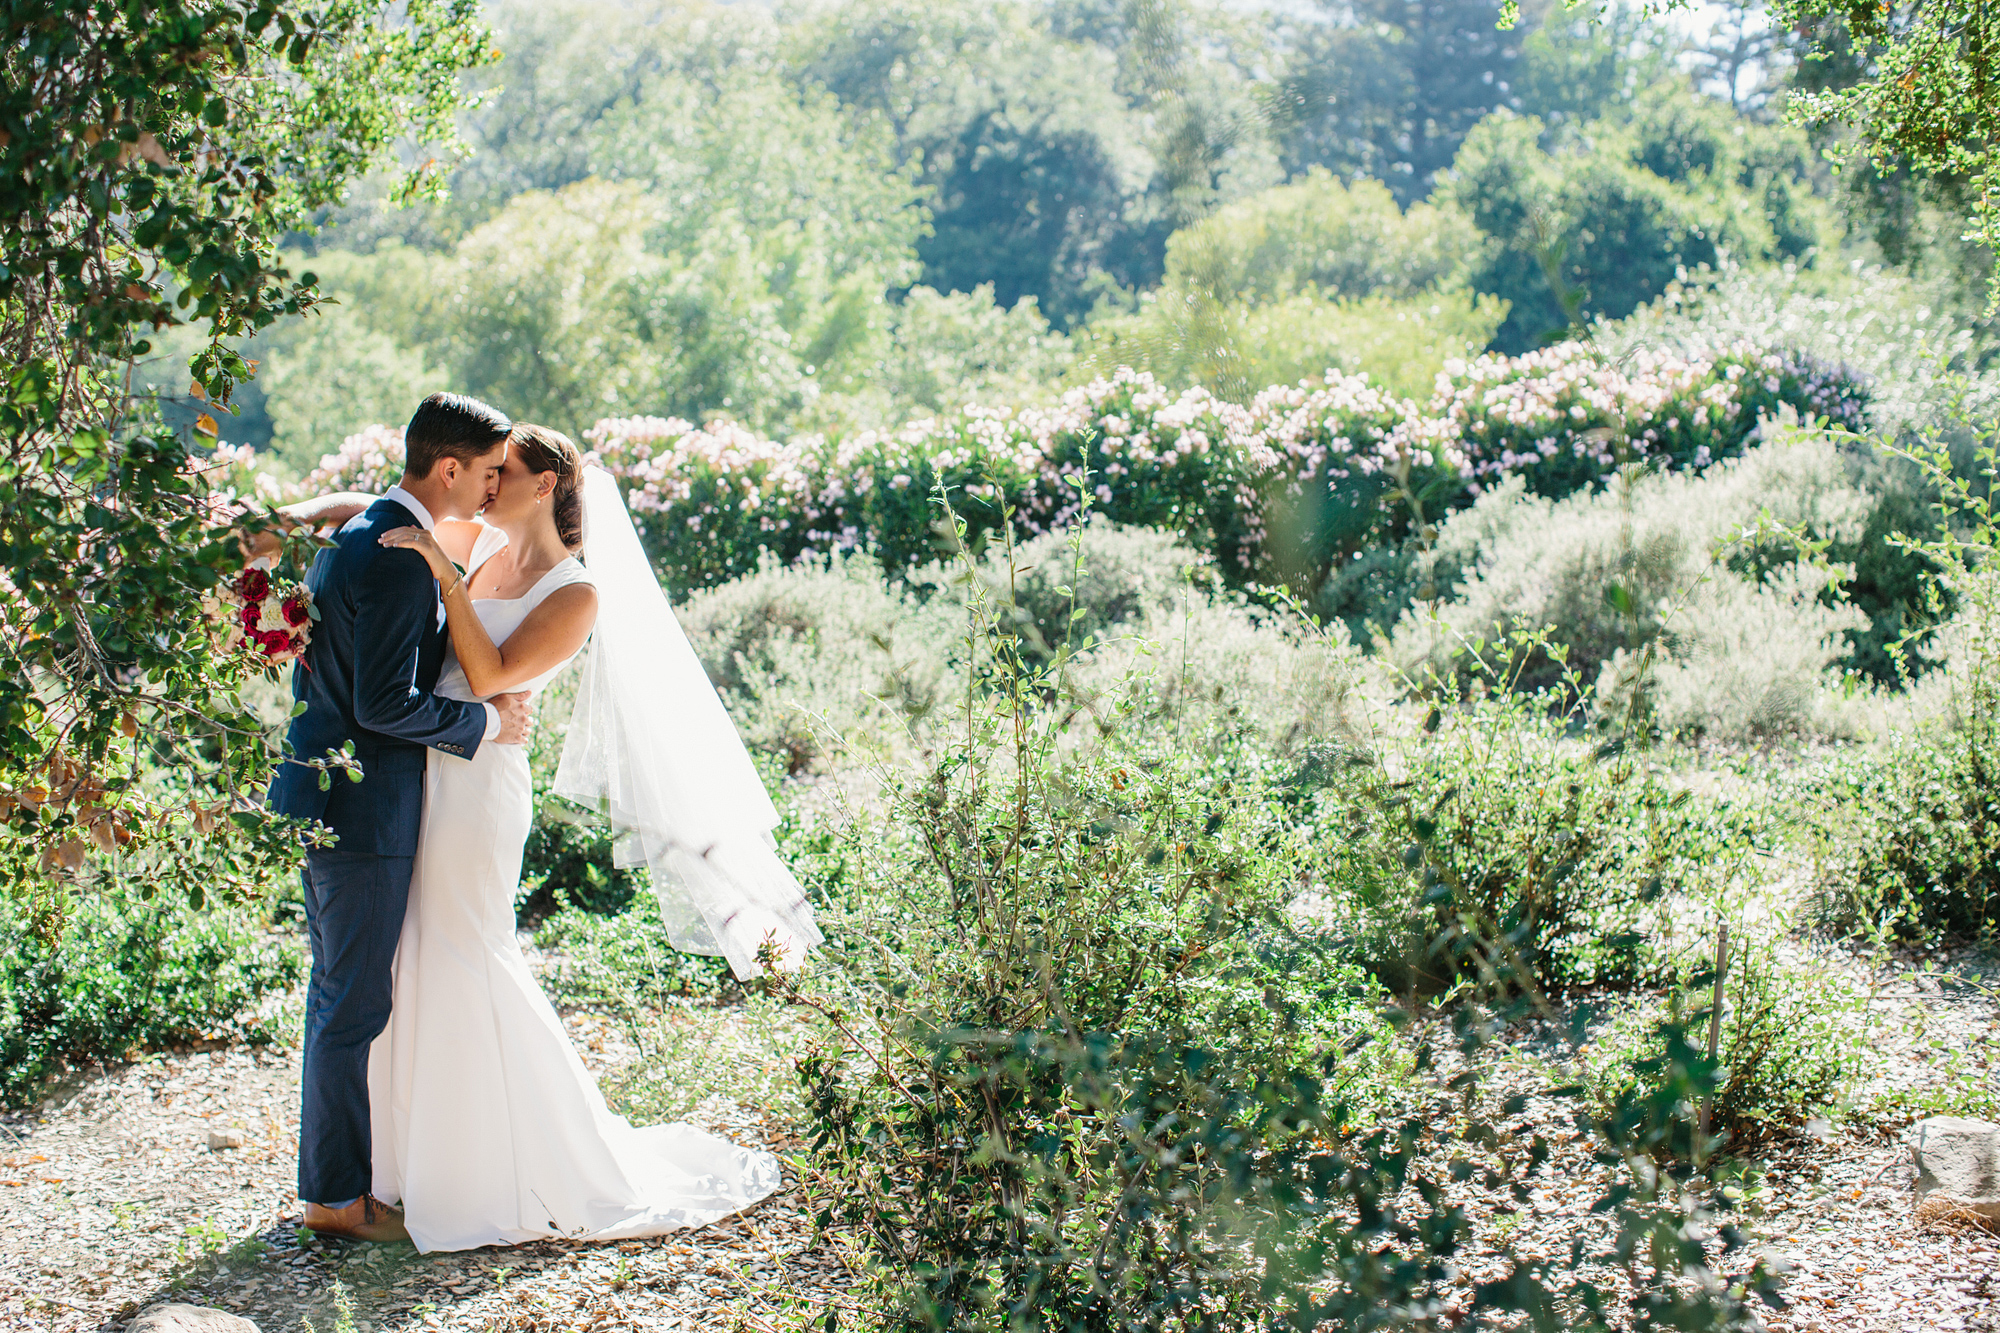 A beautiful photo with the bride and groom with a lot of greenery. 